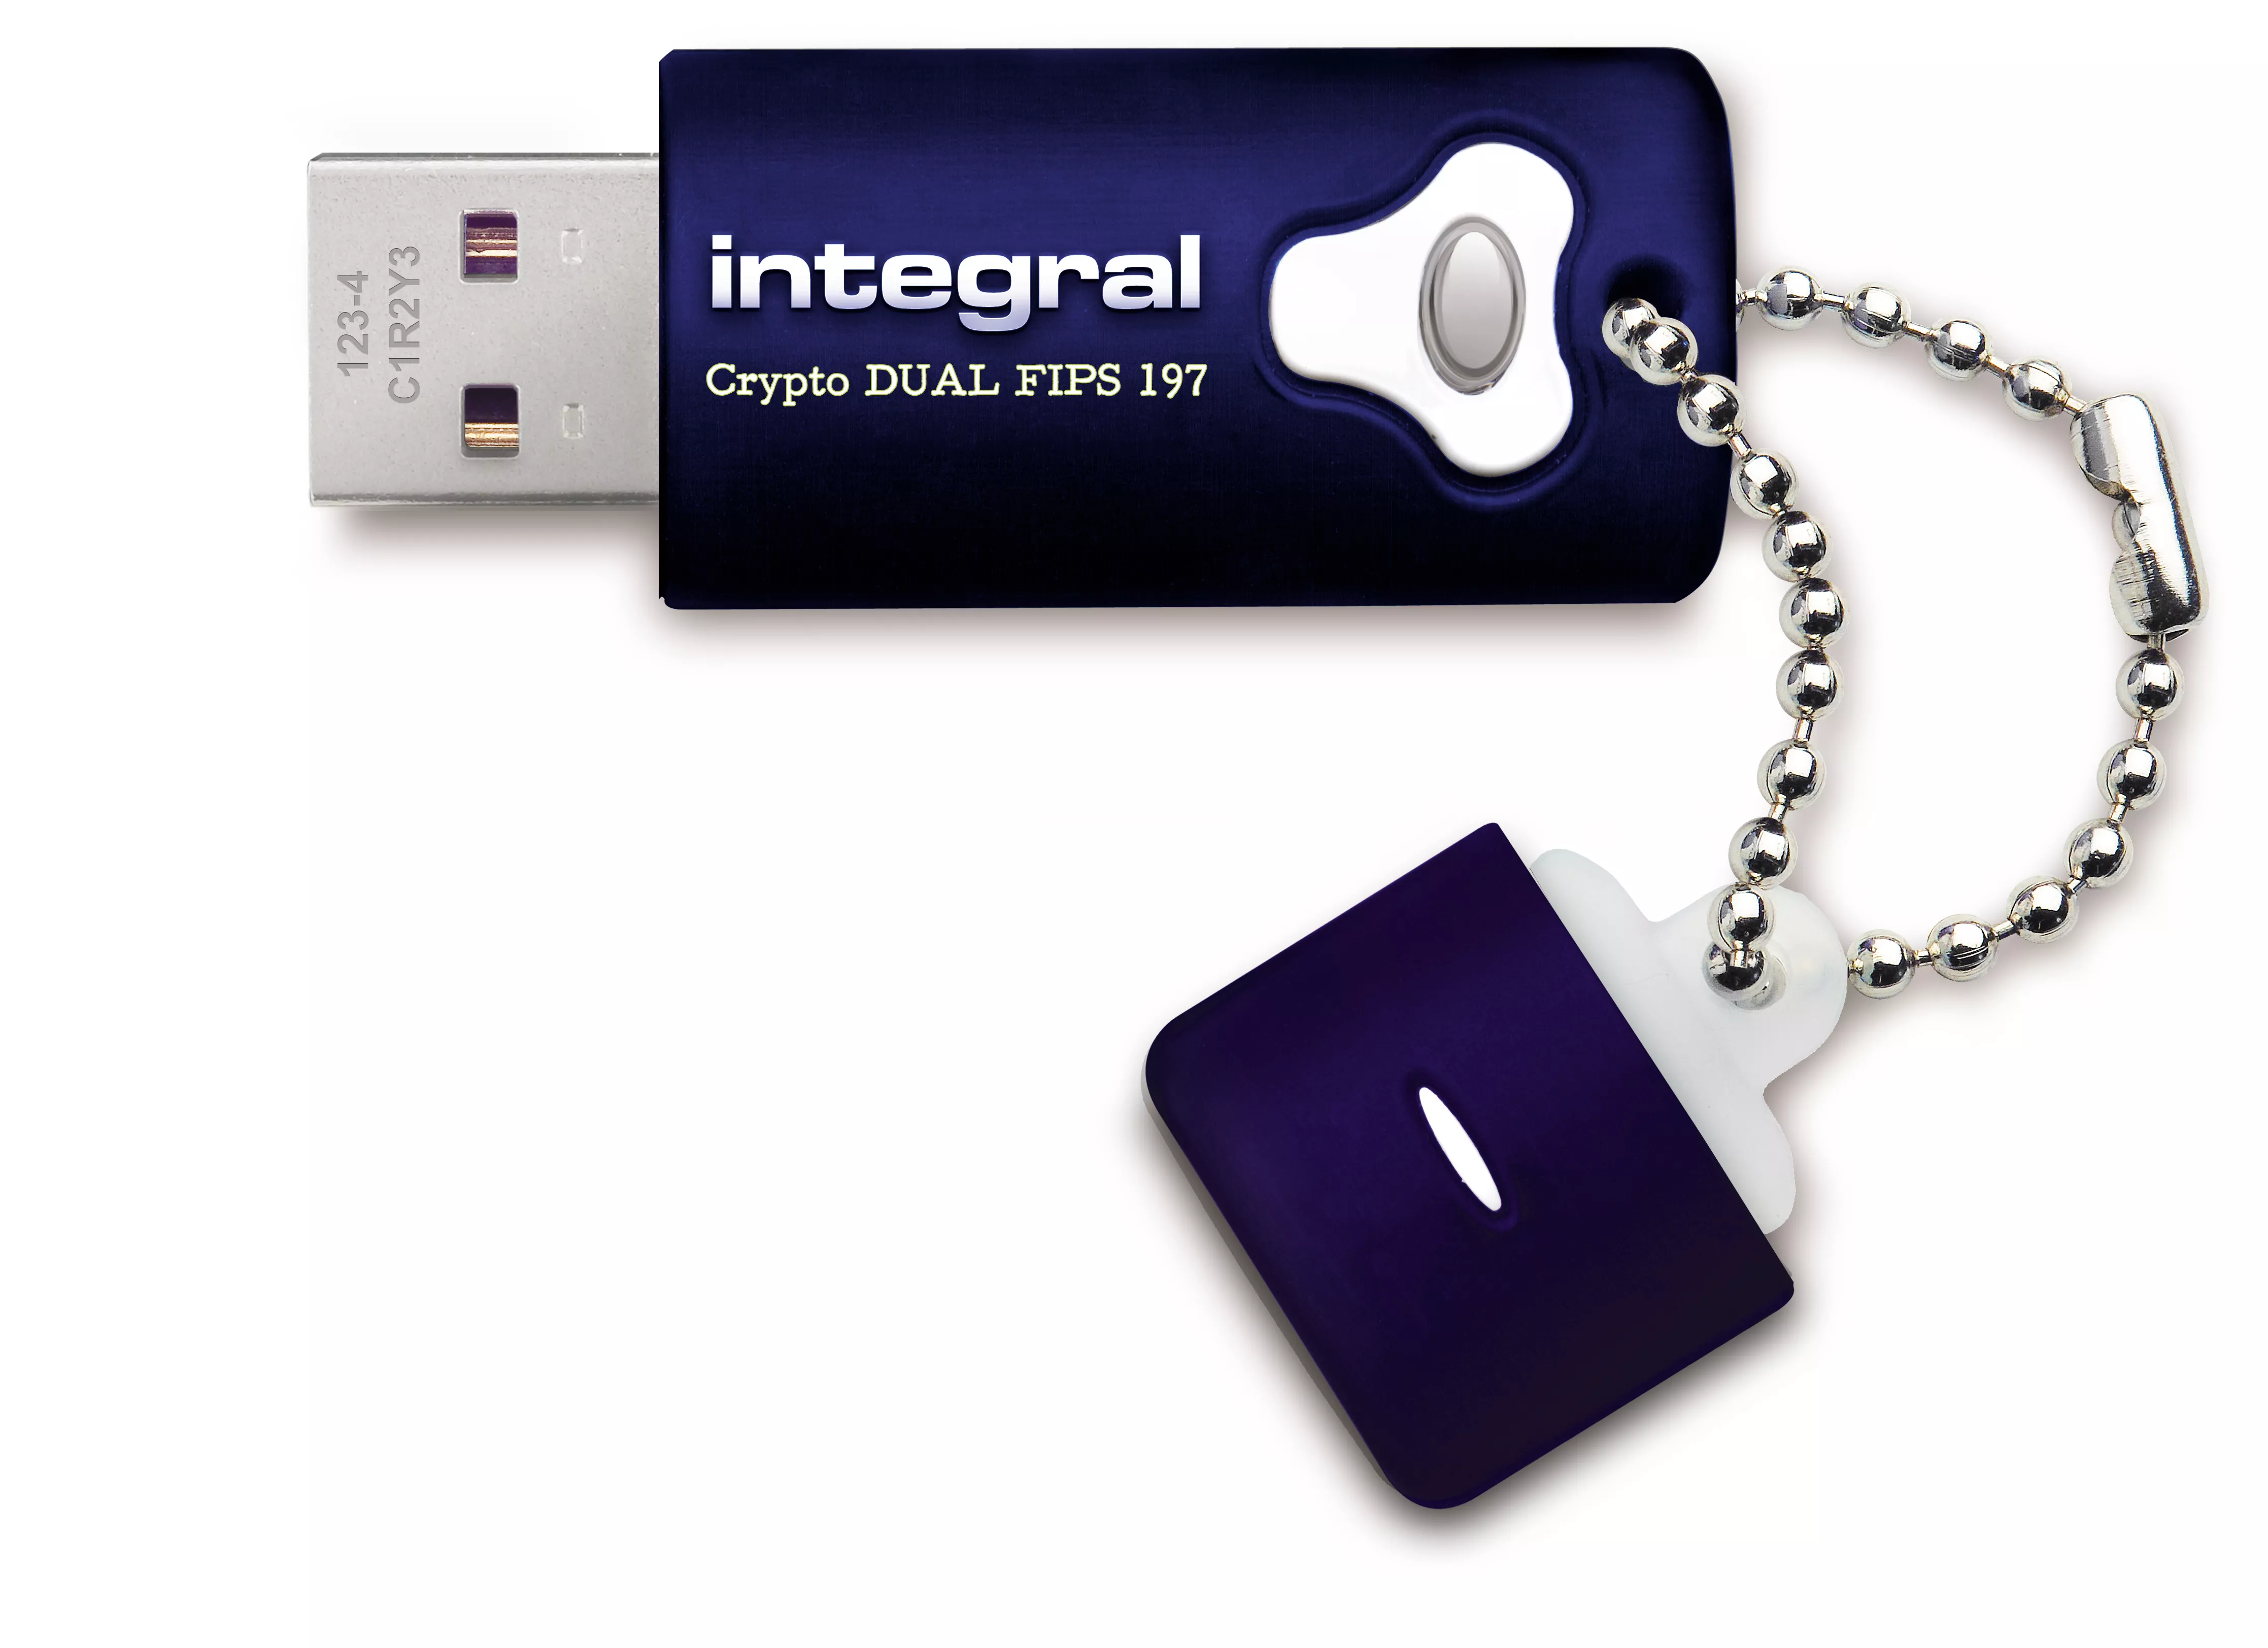 Revendeur officiel Adaptateur stockage Integral 16GB Crypto Dual FIPS 197 Encrypted USB 3.0